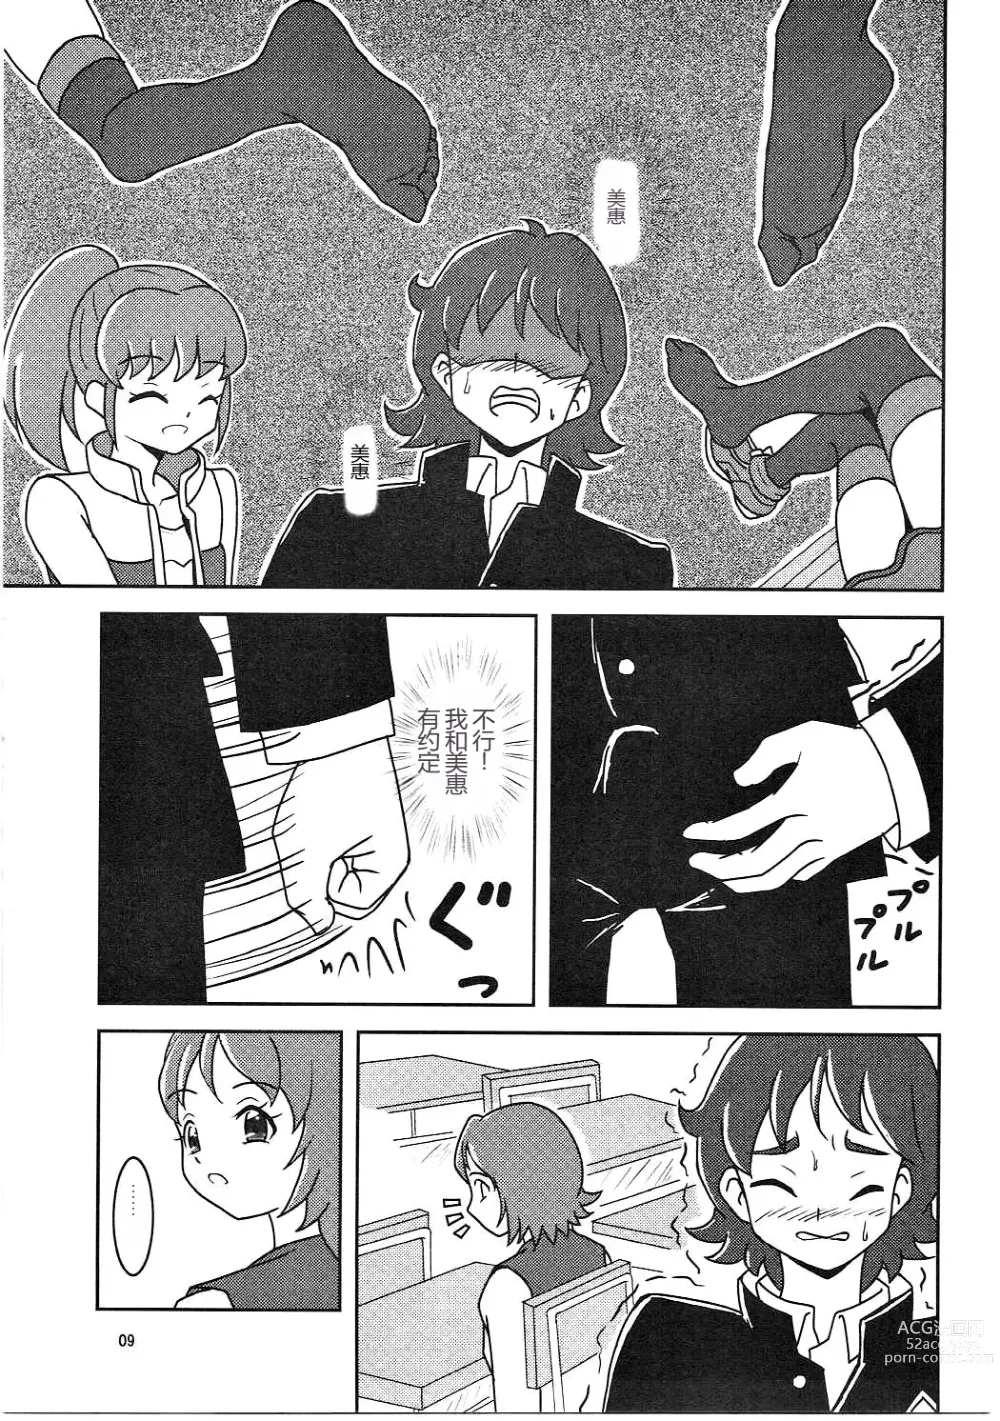 Page 10 of doujinshi HappinessCharge Zuricure!